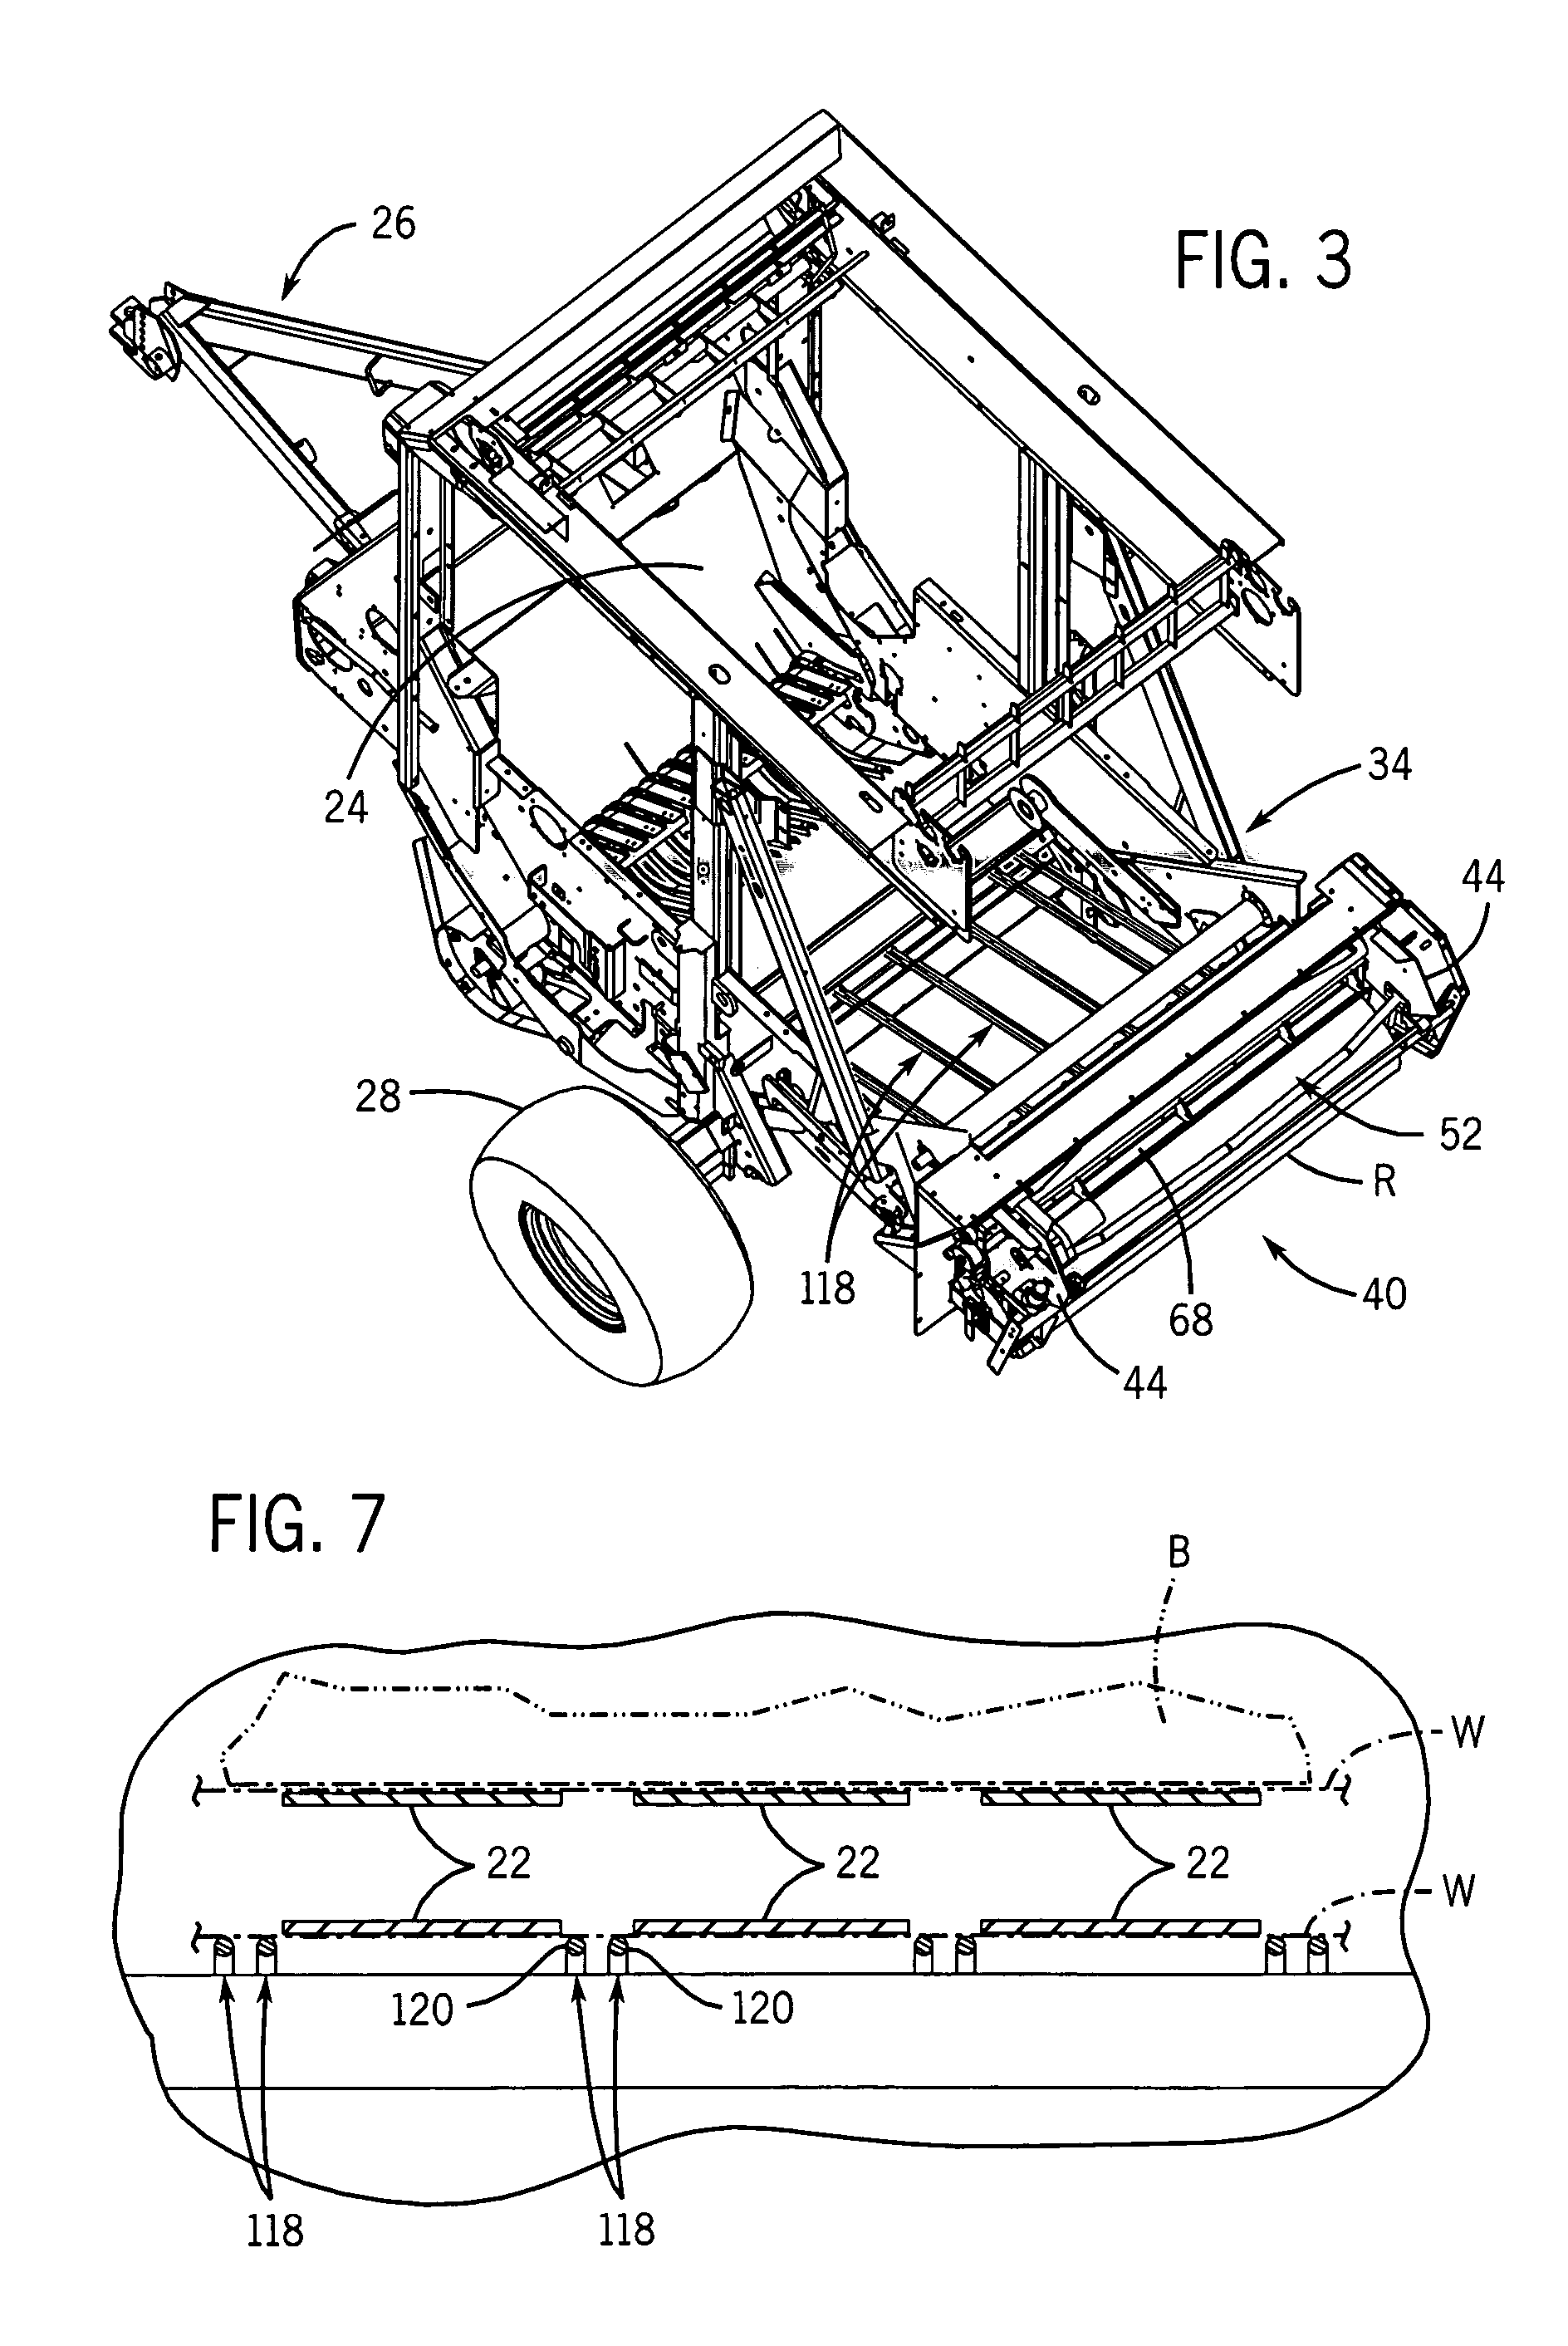 Net material feeding and cutting system for an agricultural round baler